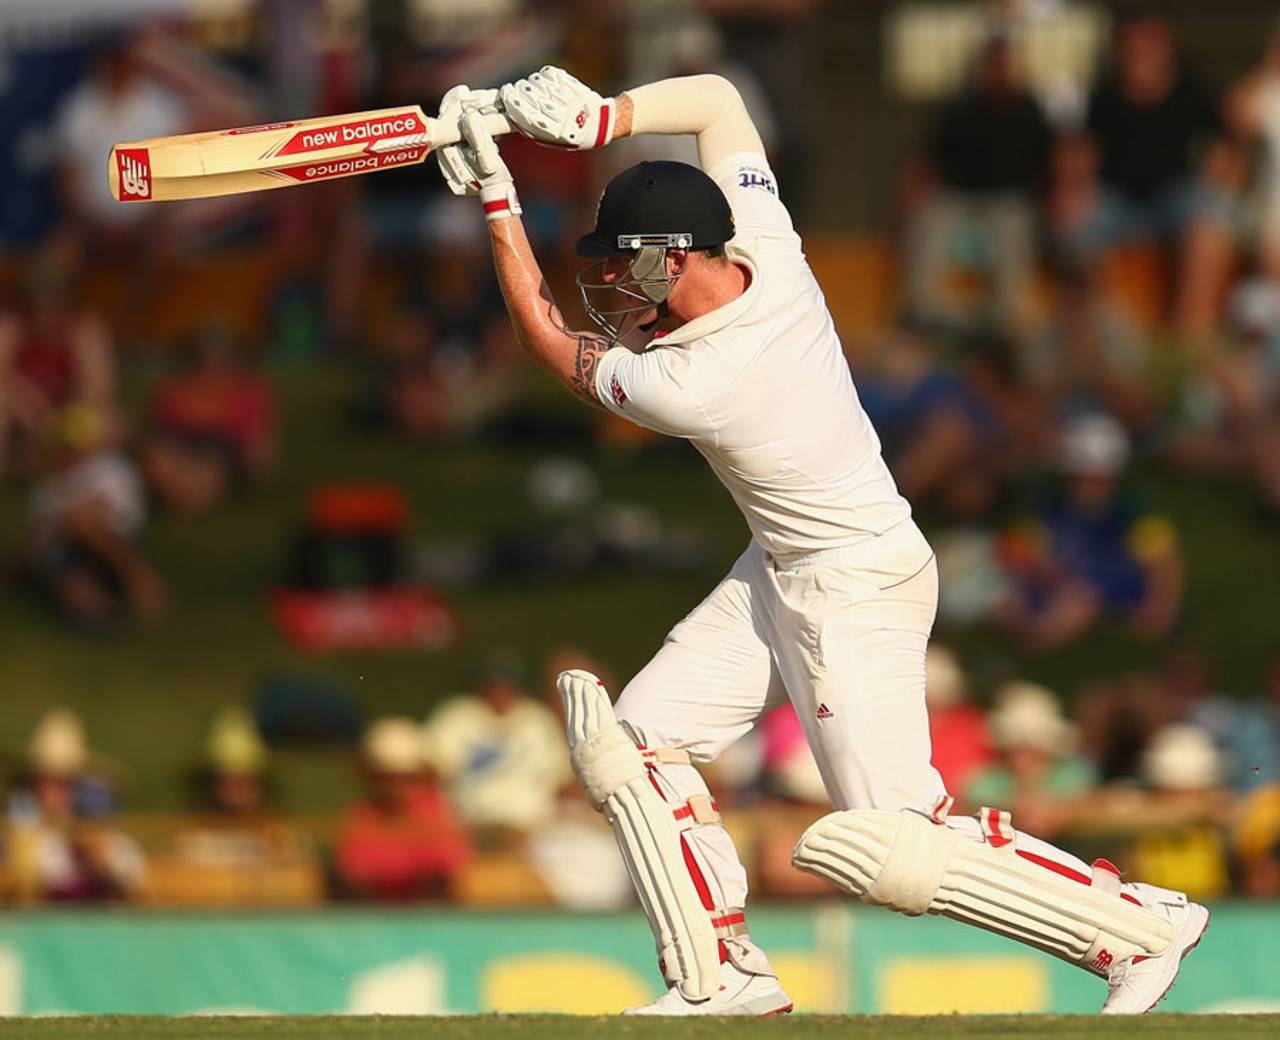 Ben Stokes played an encouraging innings, Australia v England, Test, Perth, 4th day, December 16, 2013